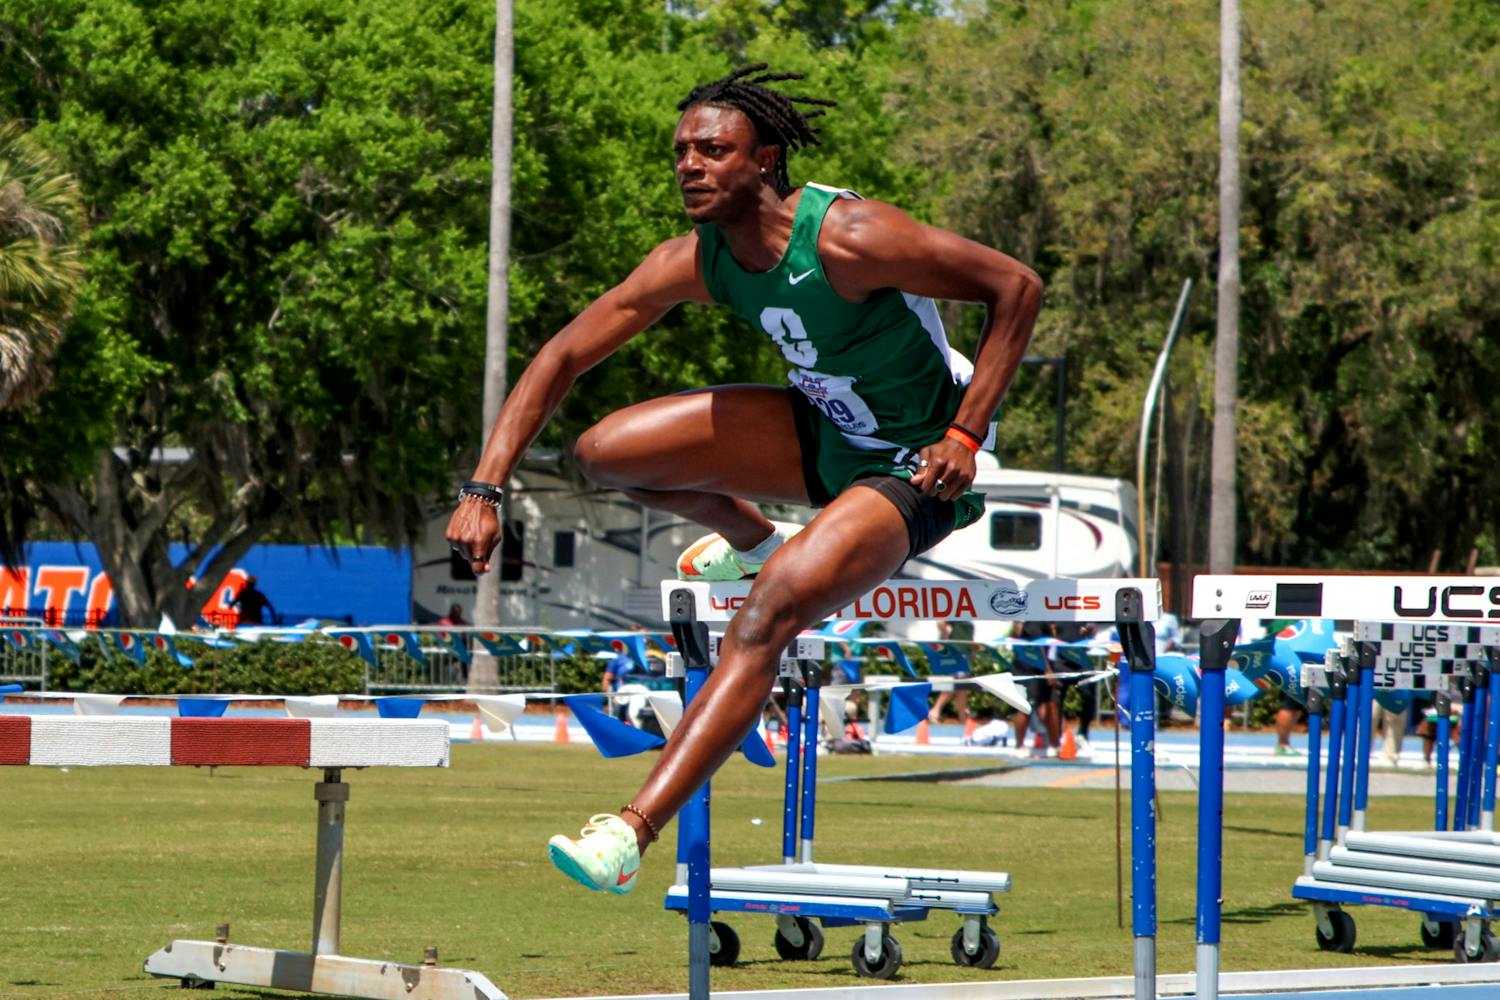 UNC Charlotte track and field athlete Sam Thompson clears a hurdle wearing a green uniform similar to his high school attire during the Pepsi Florida Relays Friday, March 31, 2023. Thompson was a student at UF before he transferred and joined UNC Charlotte&#x27;s team.